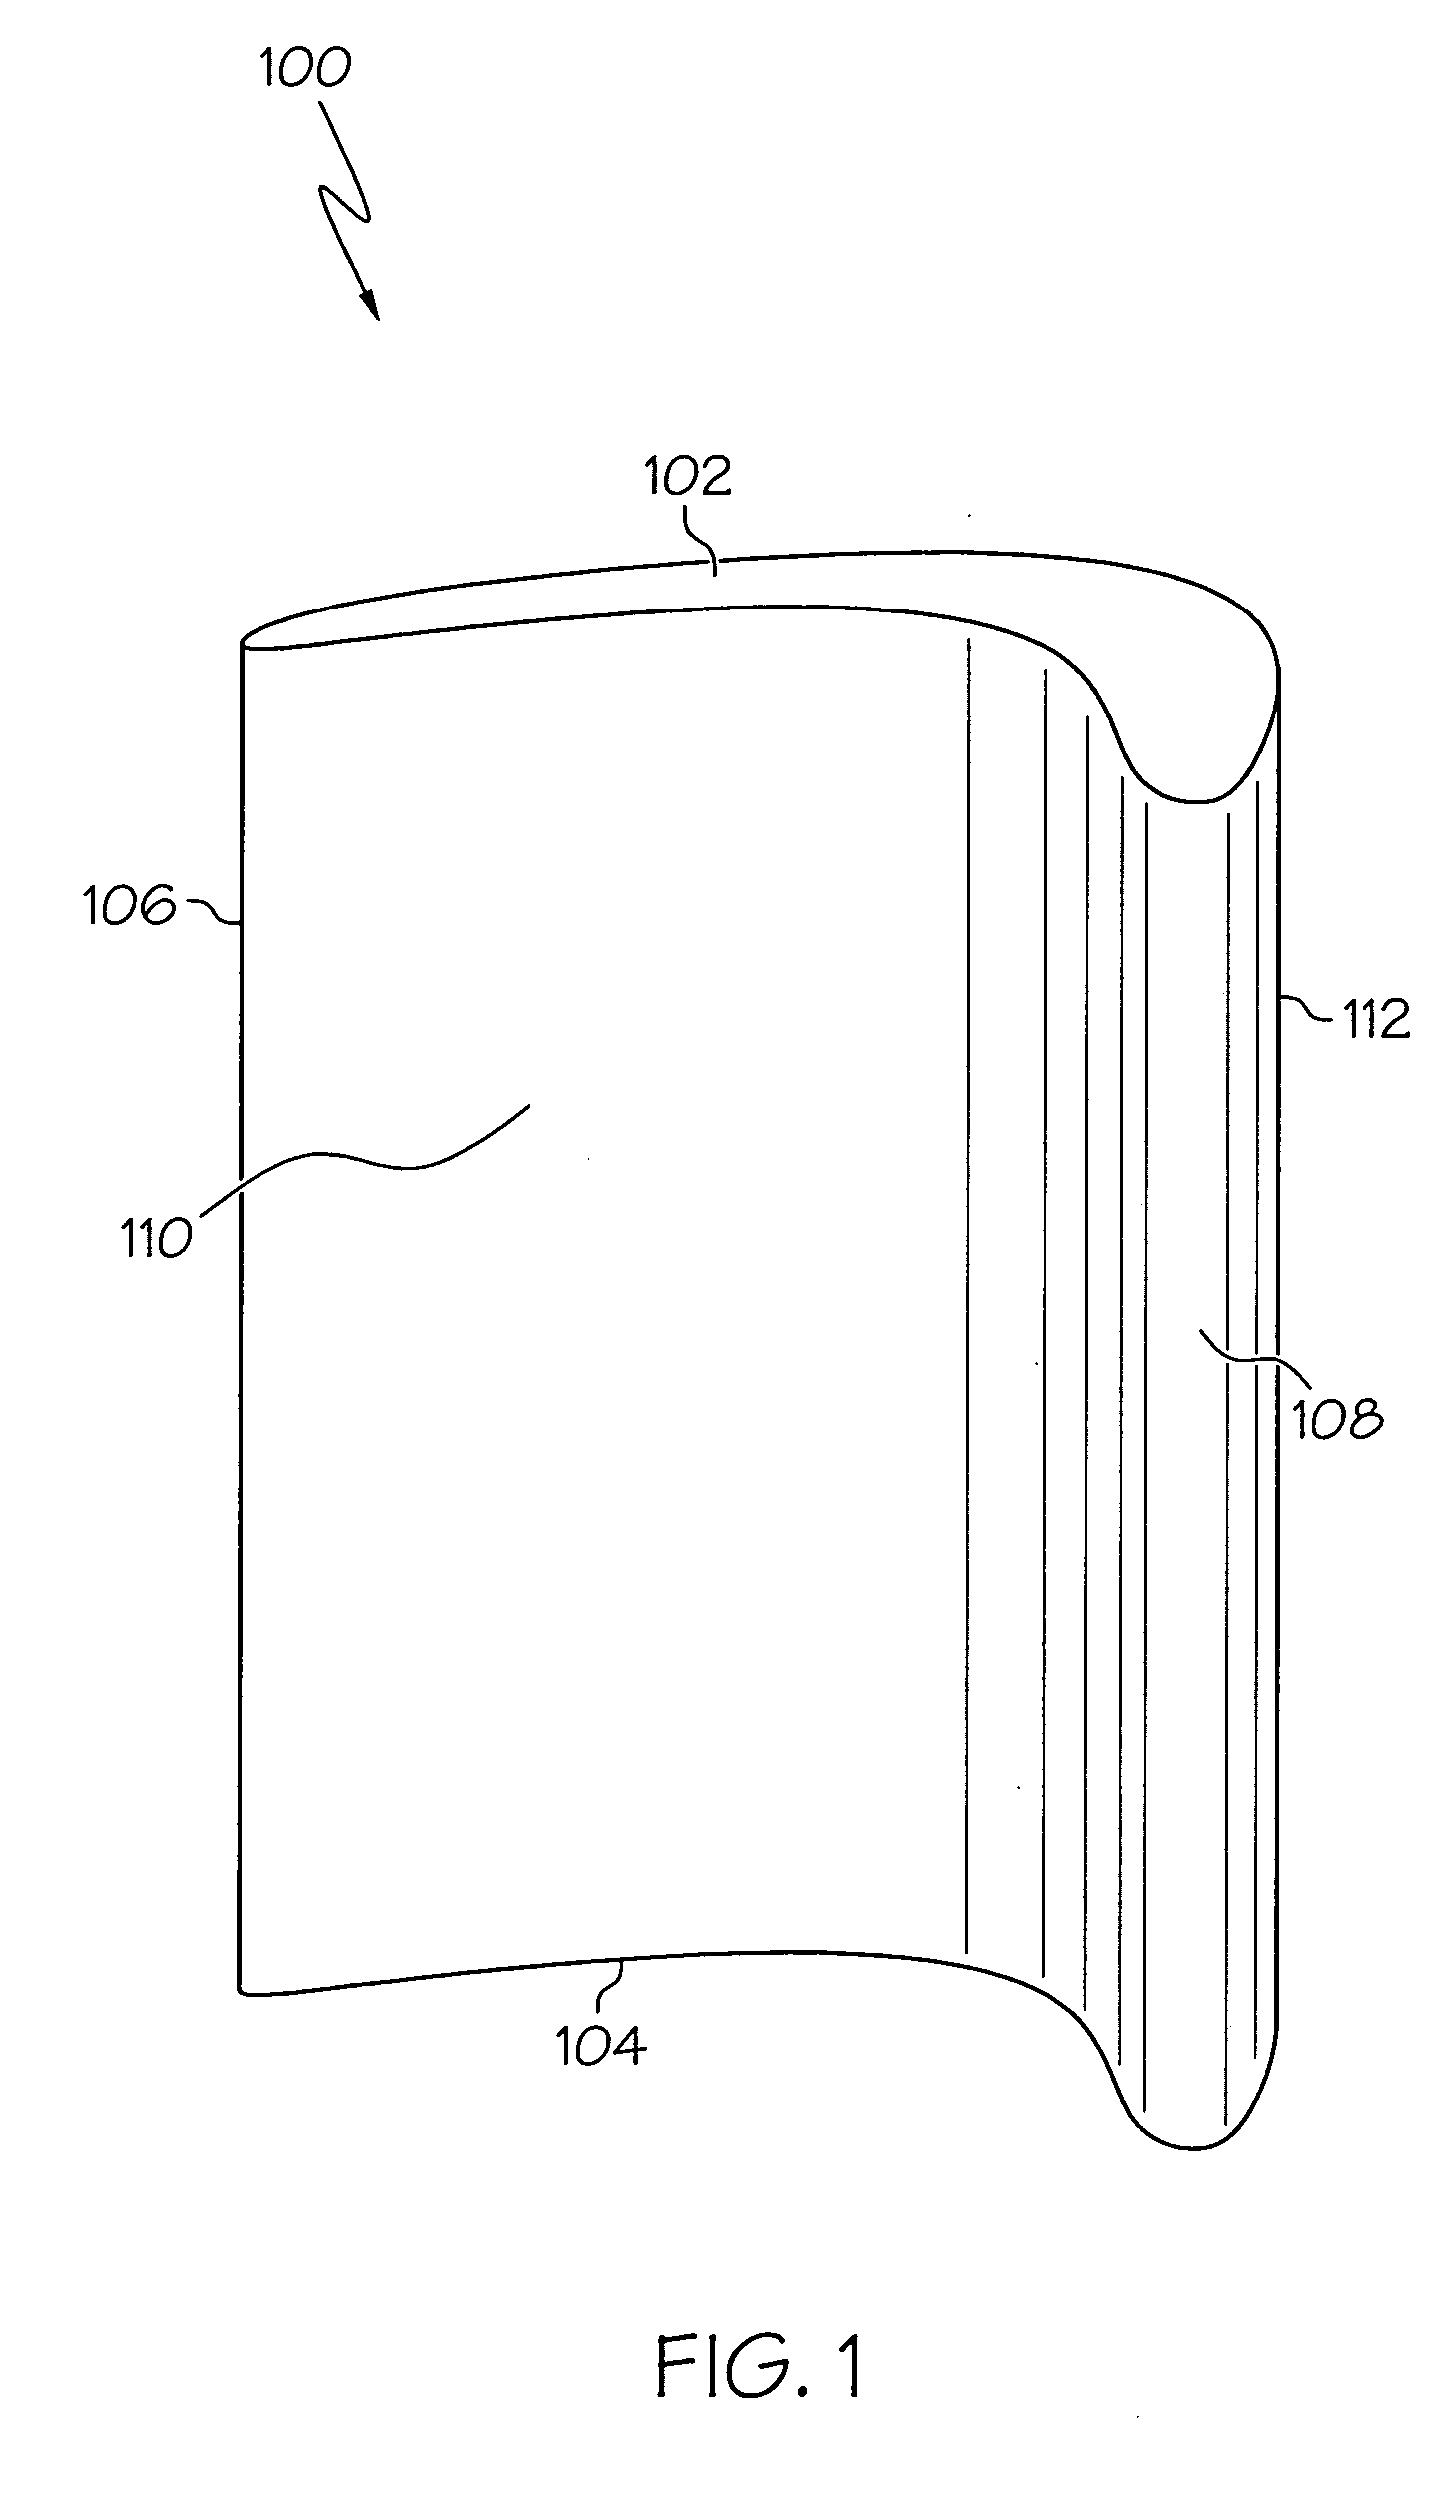 Activated diffusion brazing alloys and repair process